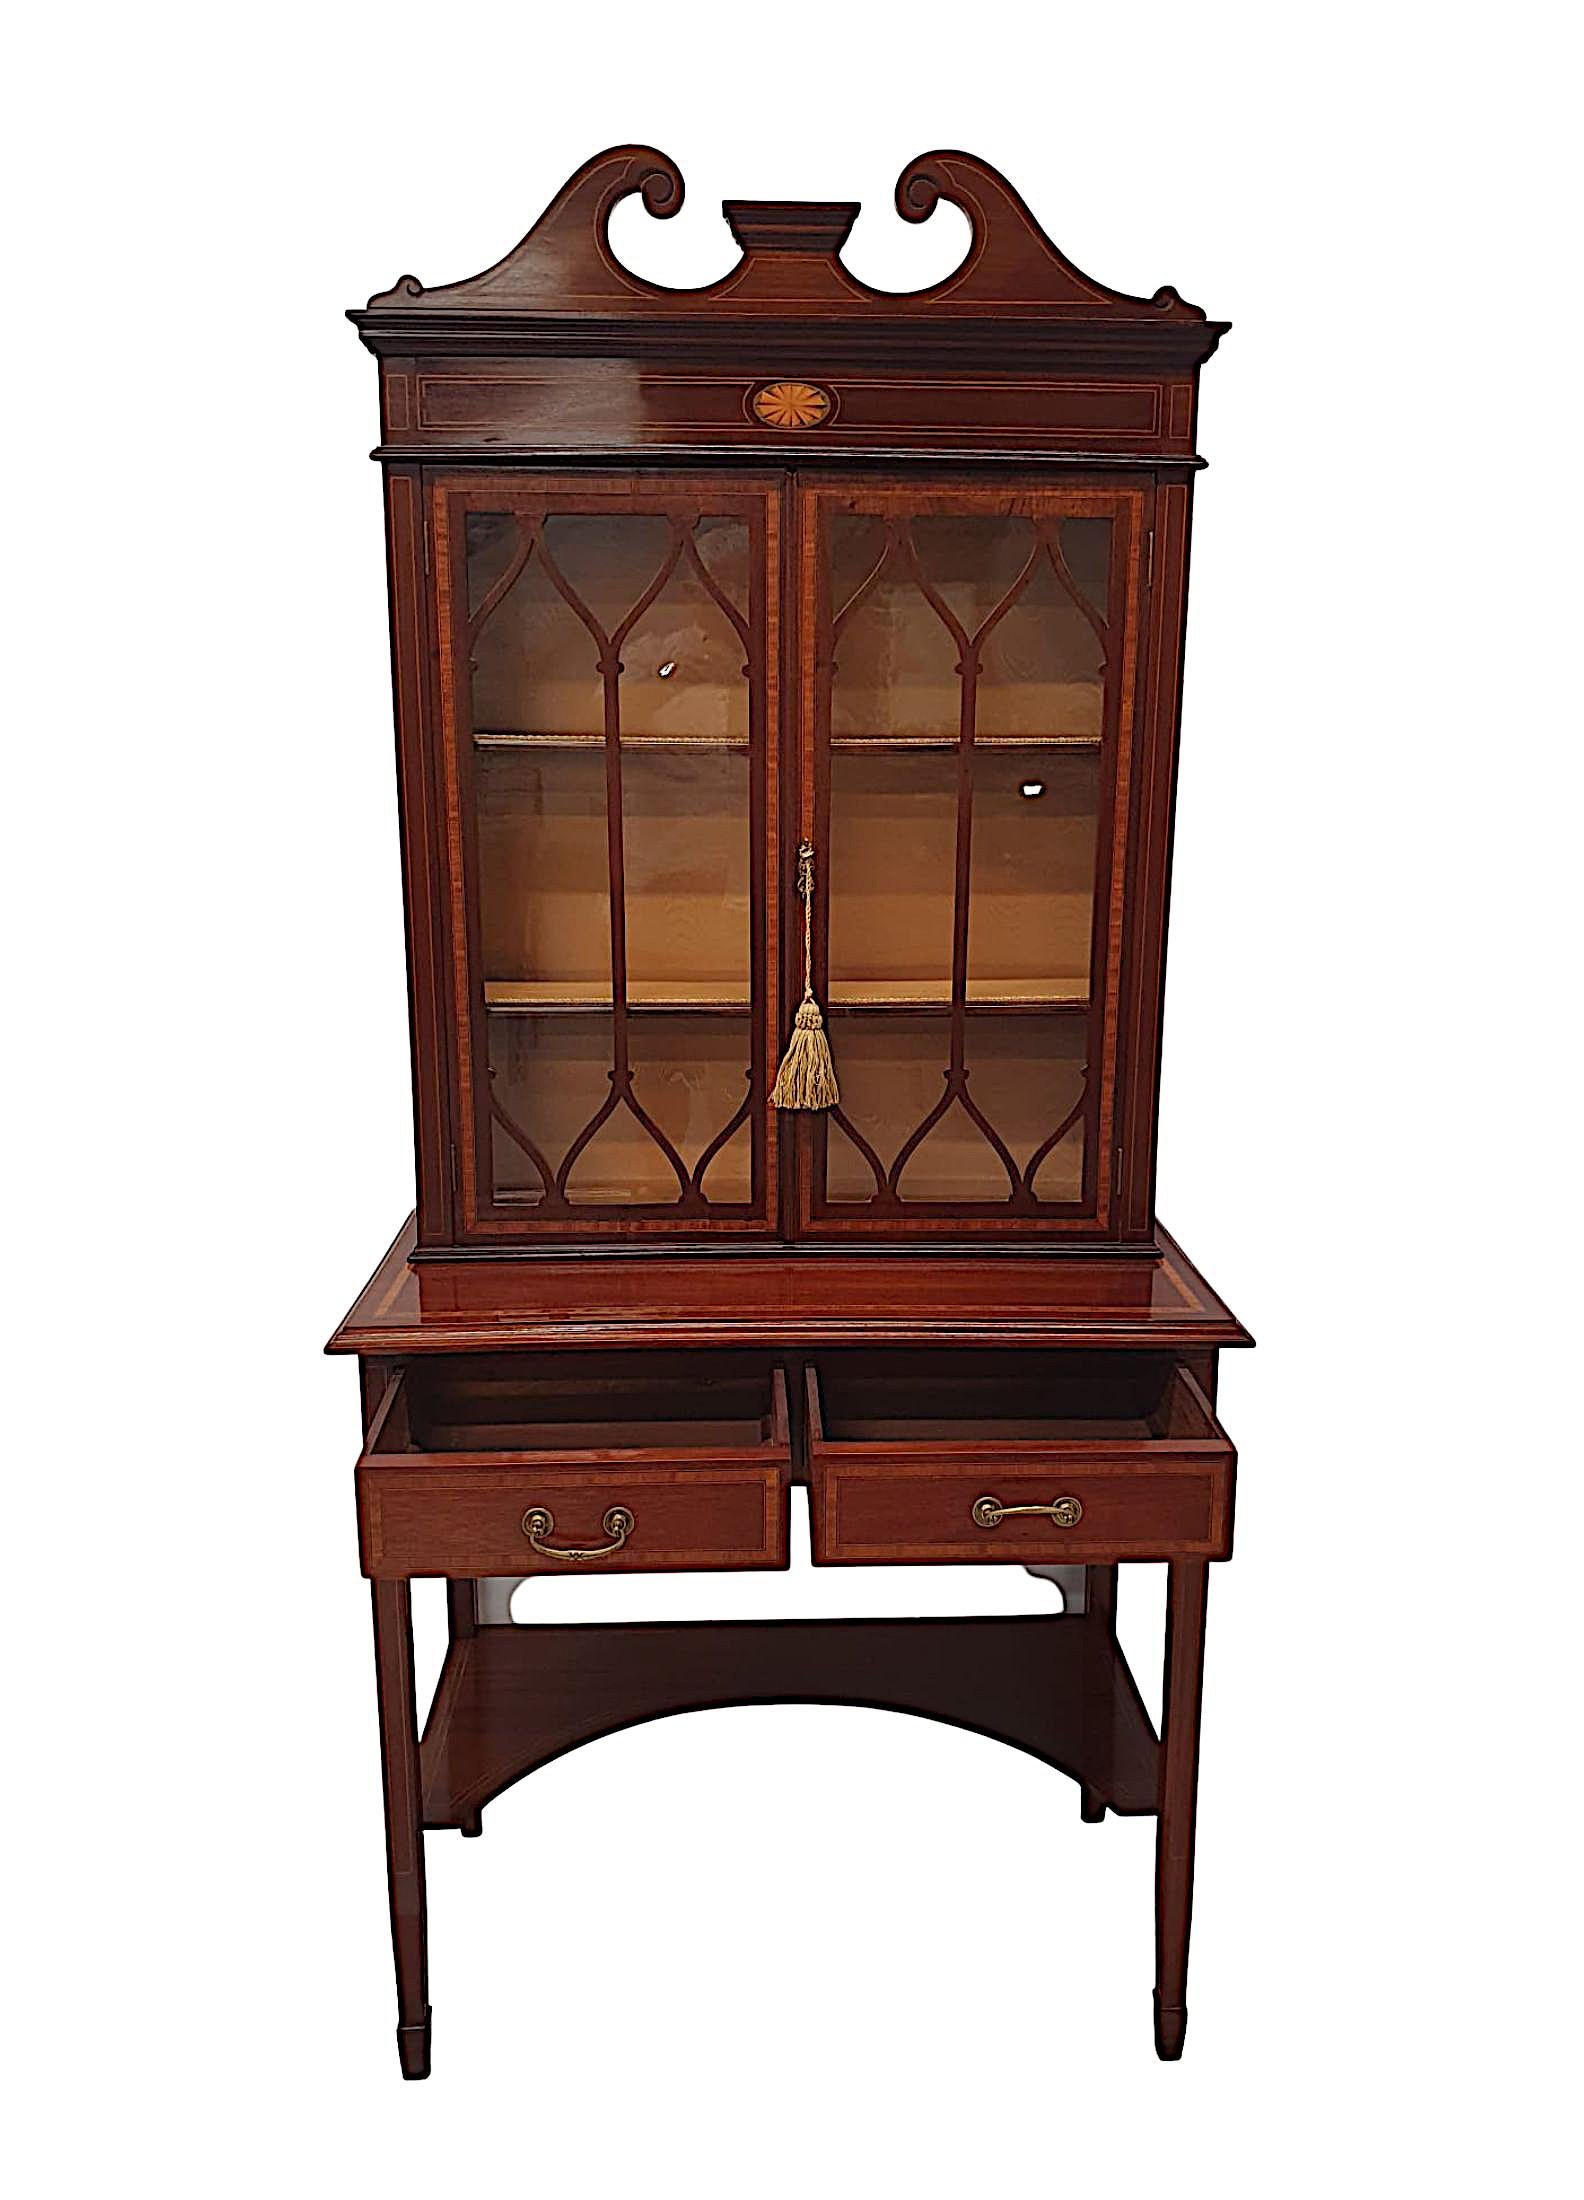 20th Century Fabulous Edwardian Inlaid Display Case or Bookcase For Sale